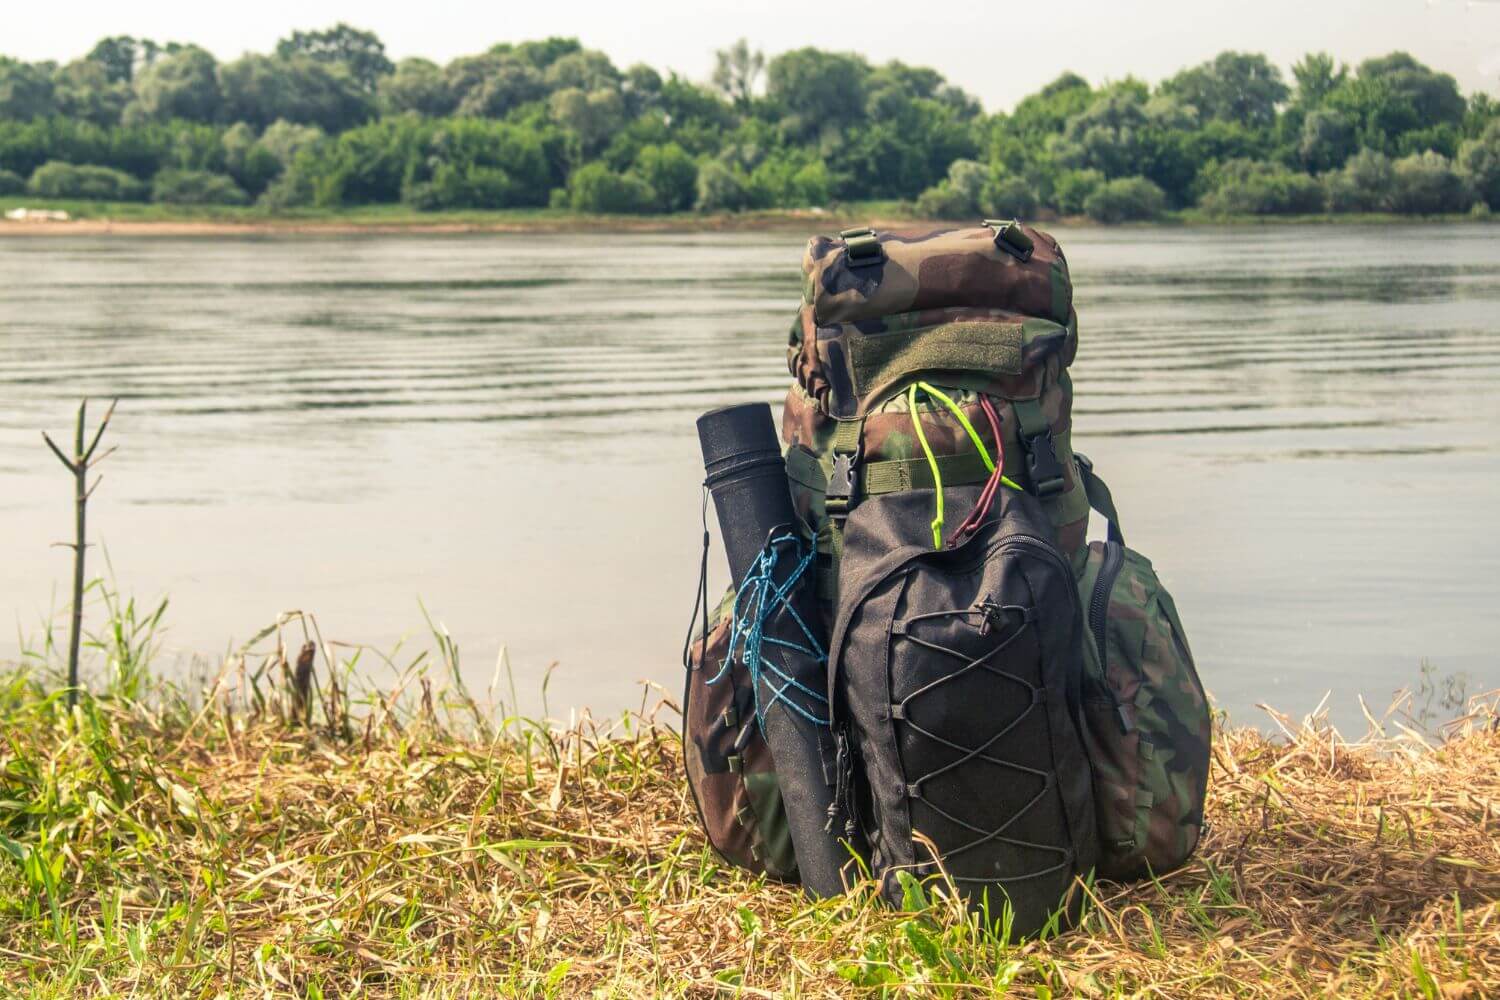 Tactical pack loaded with survival gear sitting on the grass near a lake